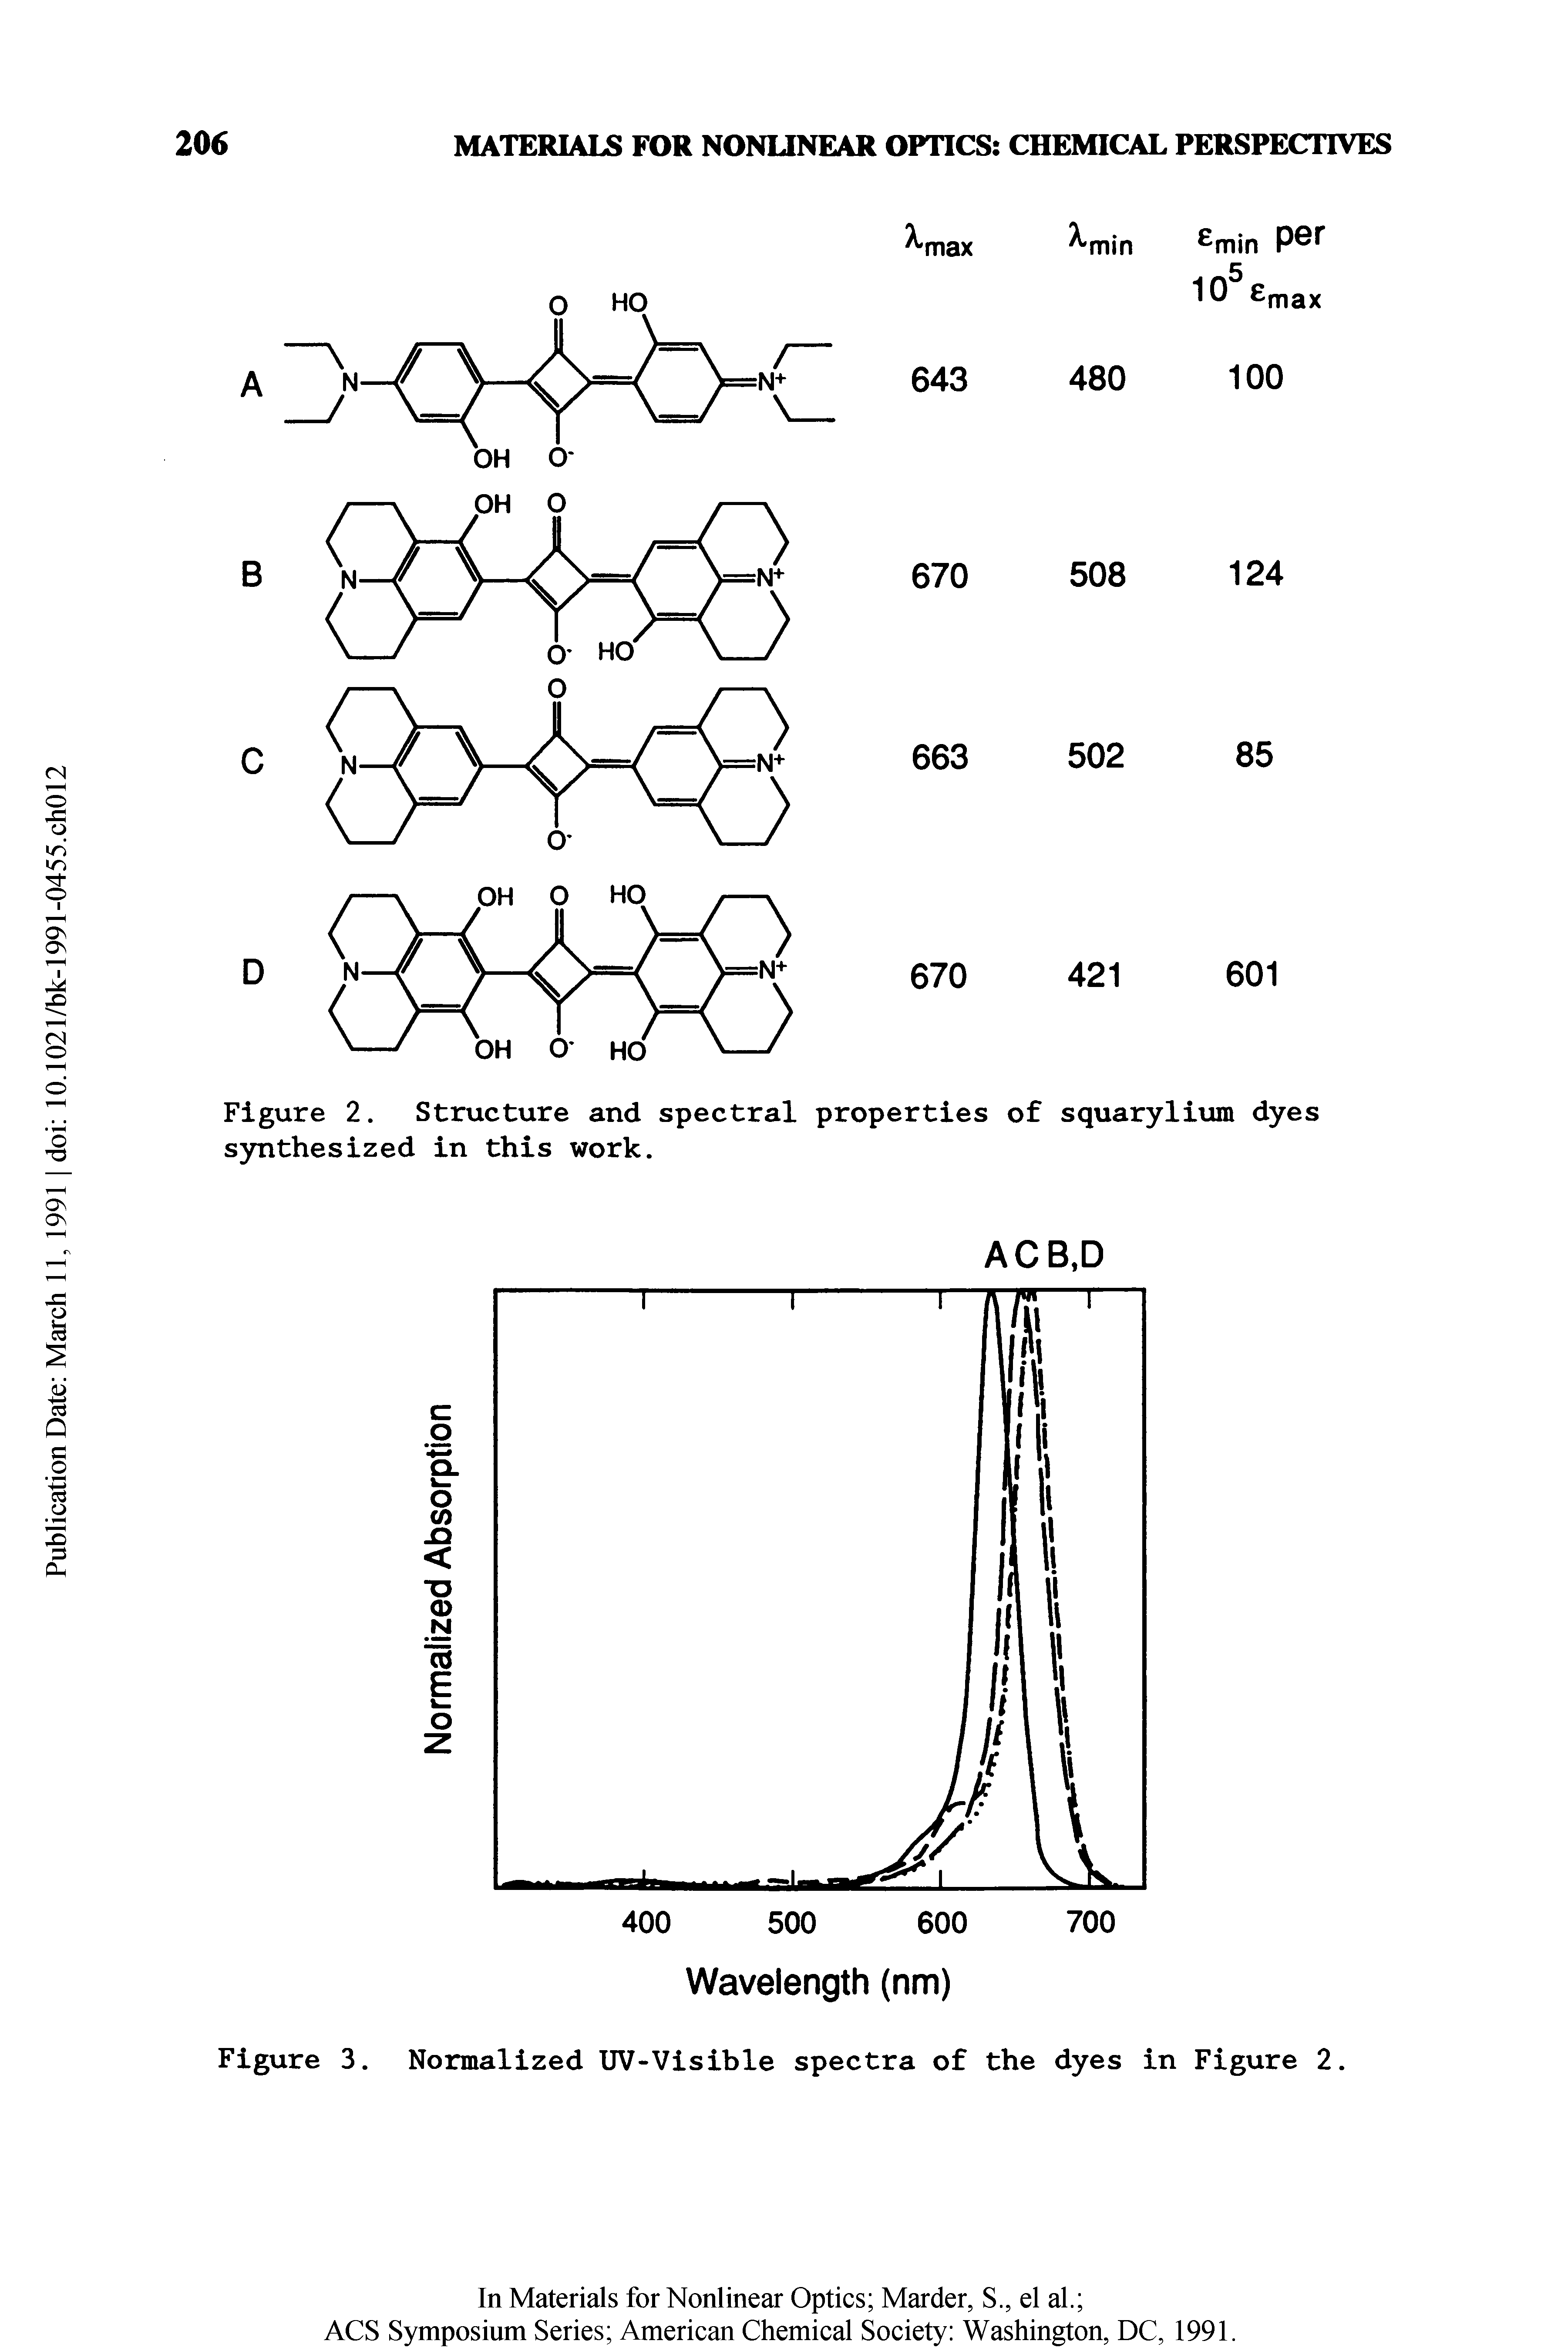 Figure 2. Structure and spectral properties of squarylium dyes synthesized in this work.